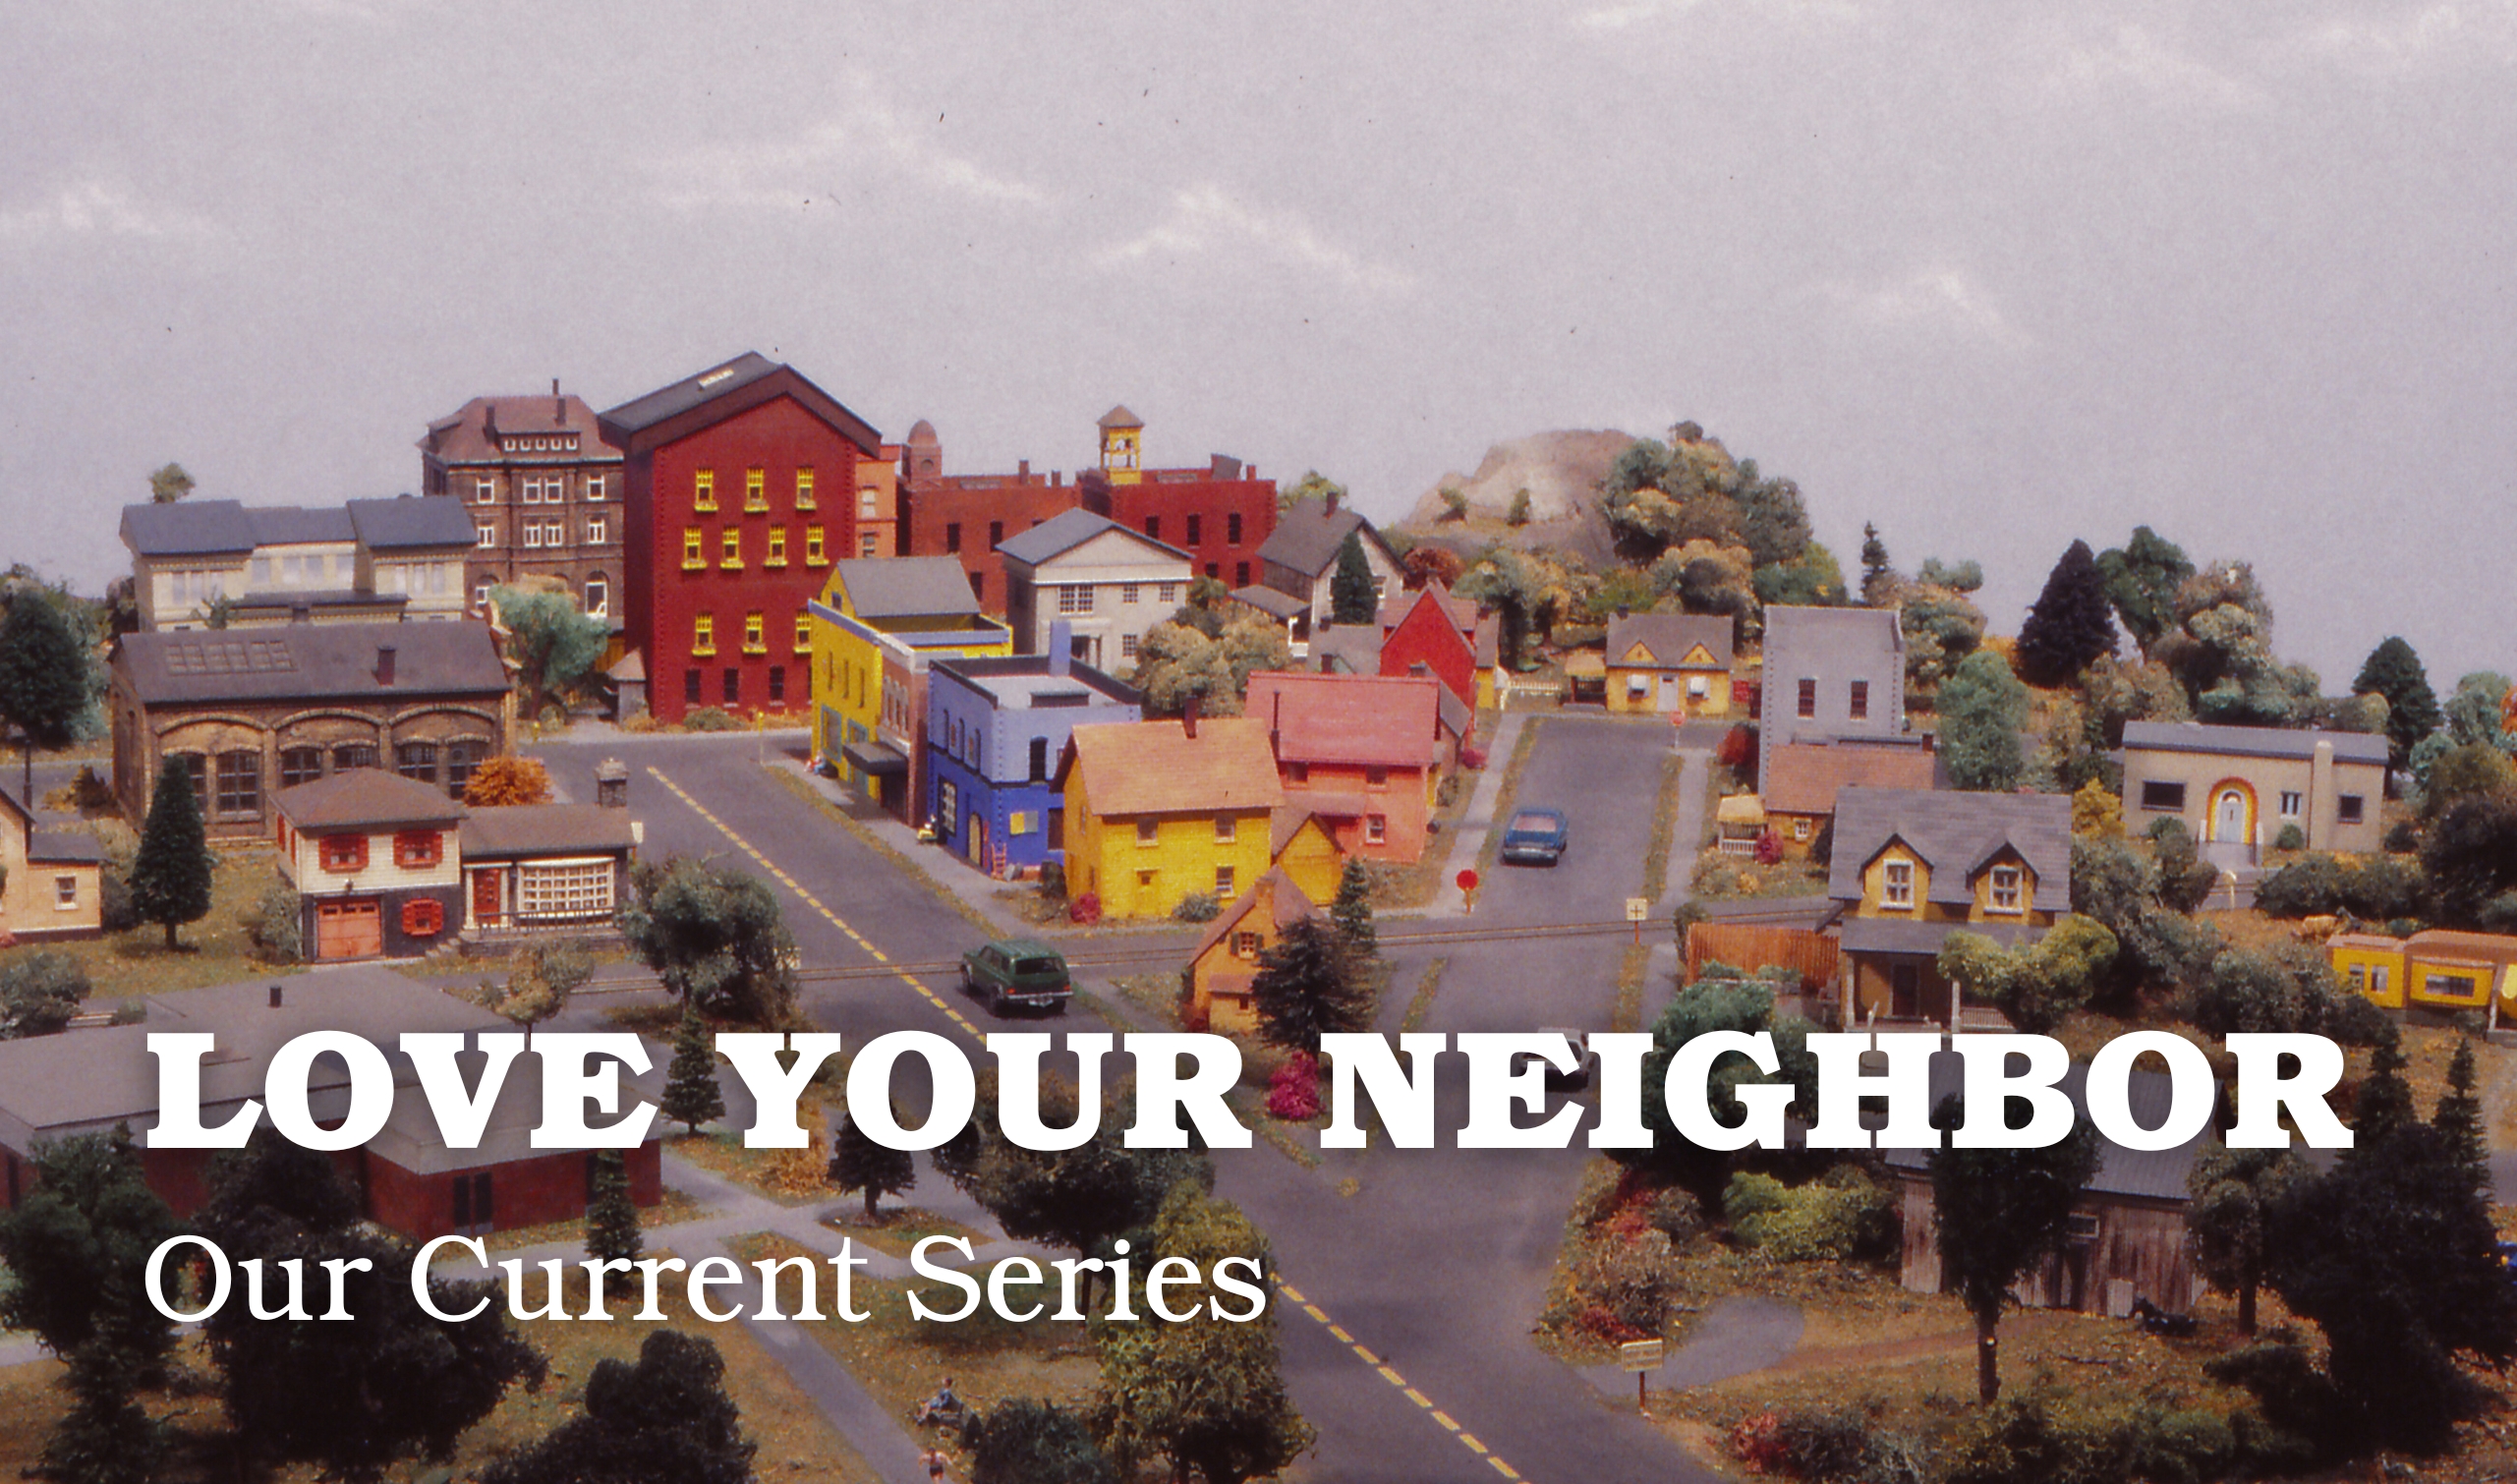 Our Current Series: Love Your Neighbor